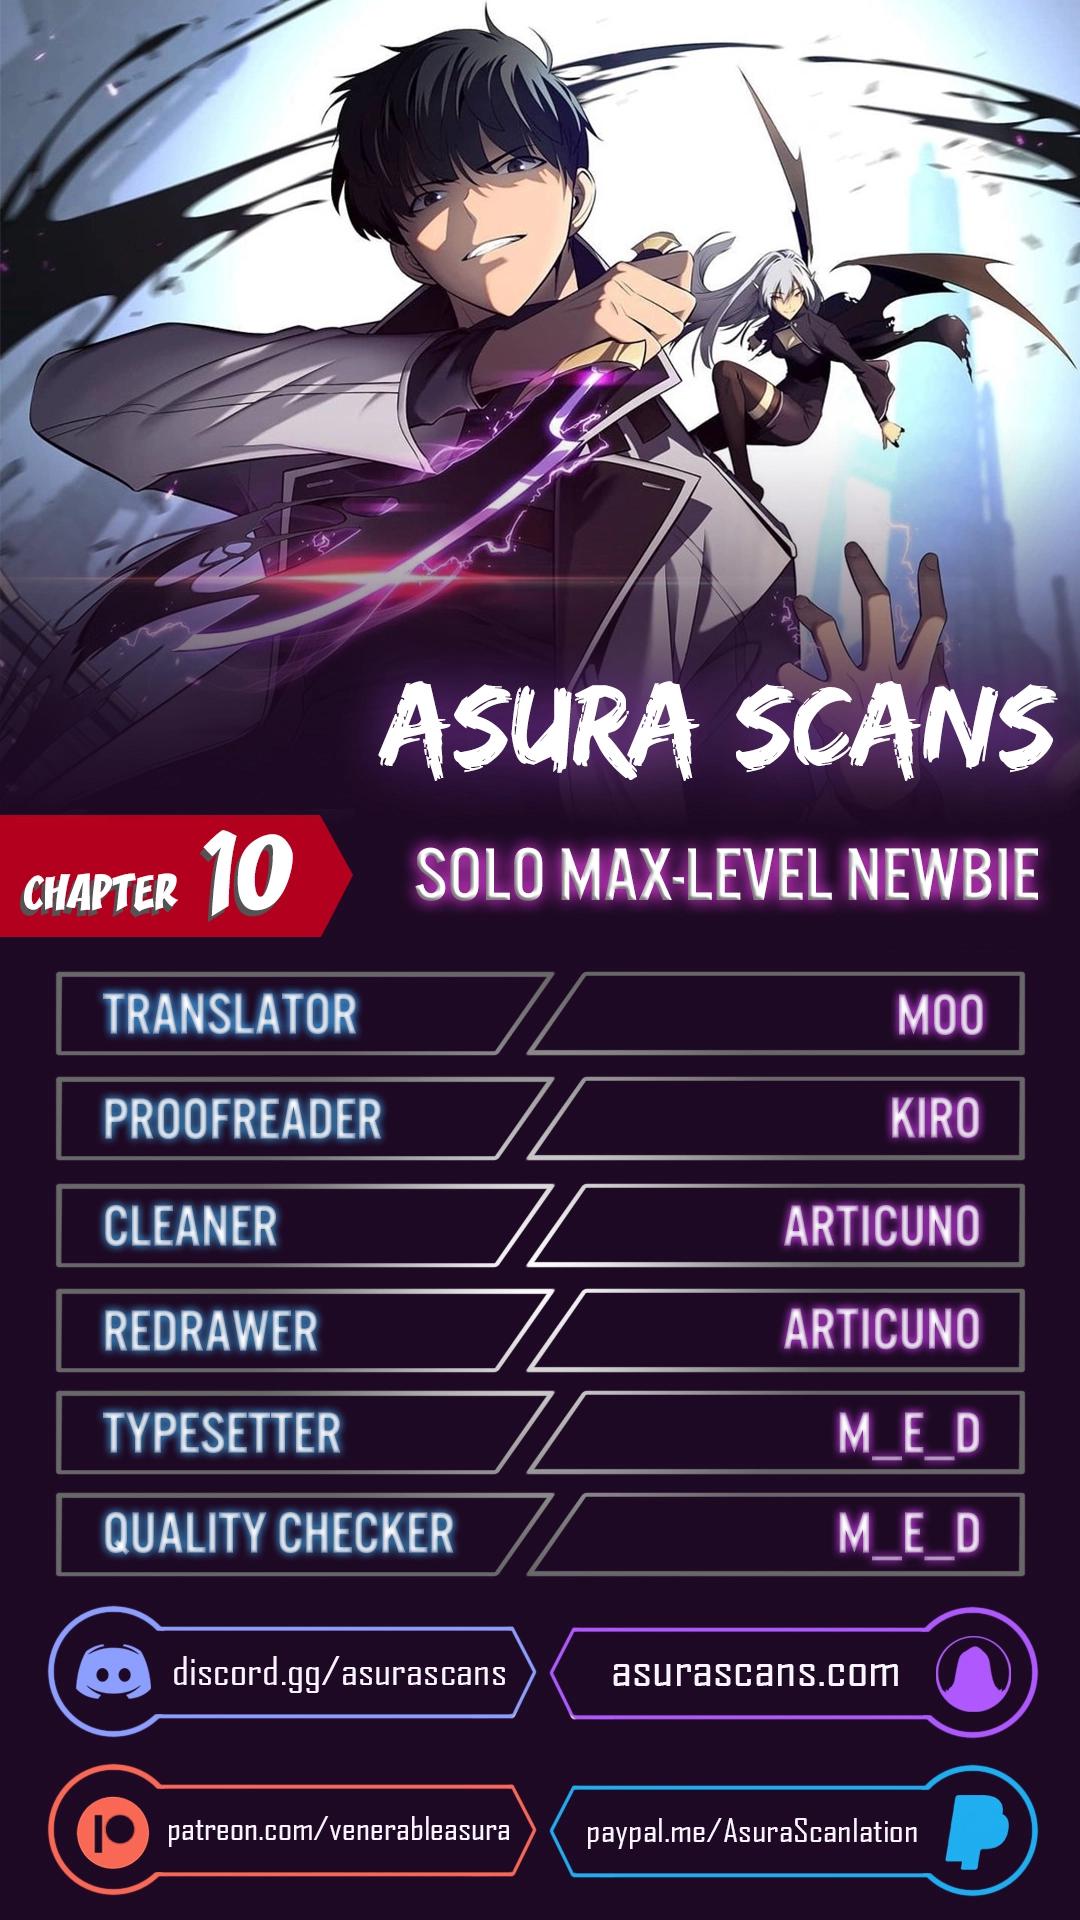 Solo Max-Level Newbie Chapter 10, Solo Max-Level Newbie 10, Read Solo Max-Level Newbie Chapter 10, Solo Max-Level Newbie Chapter 10 Manga, Solo Max-Level Newbie Chapter 10 english, Solo Max-Level Newbie Chapter 10 raw manga, Solo Max-Level Newbie Chapter 10 online, Solo Max-Level Newbie Chapter 10 high quality, Solo Max-Level Newbie 10 chapter, Solo Max-Level Newbie Chapter 10 manga scan